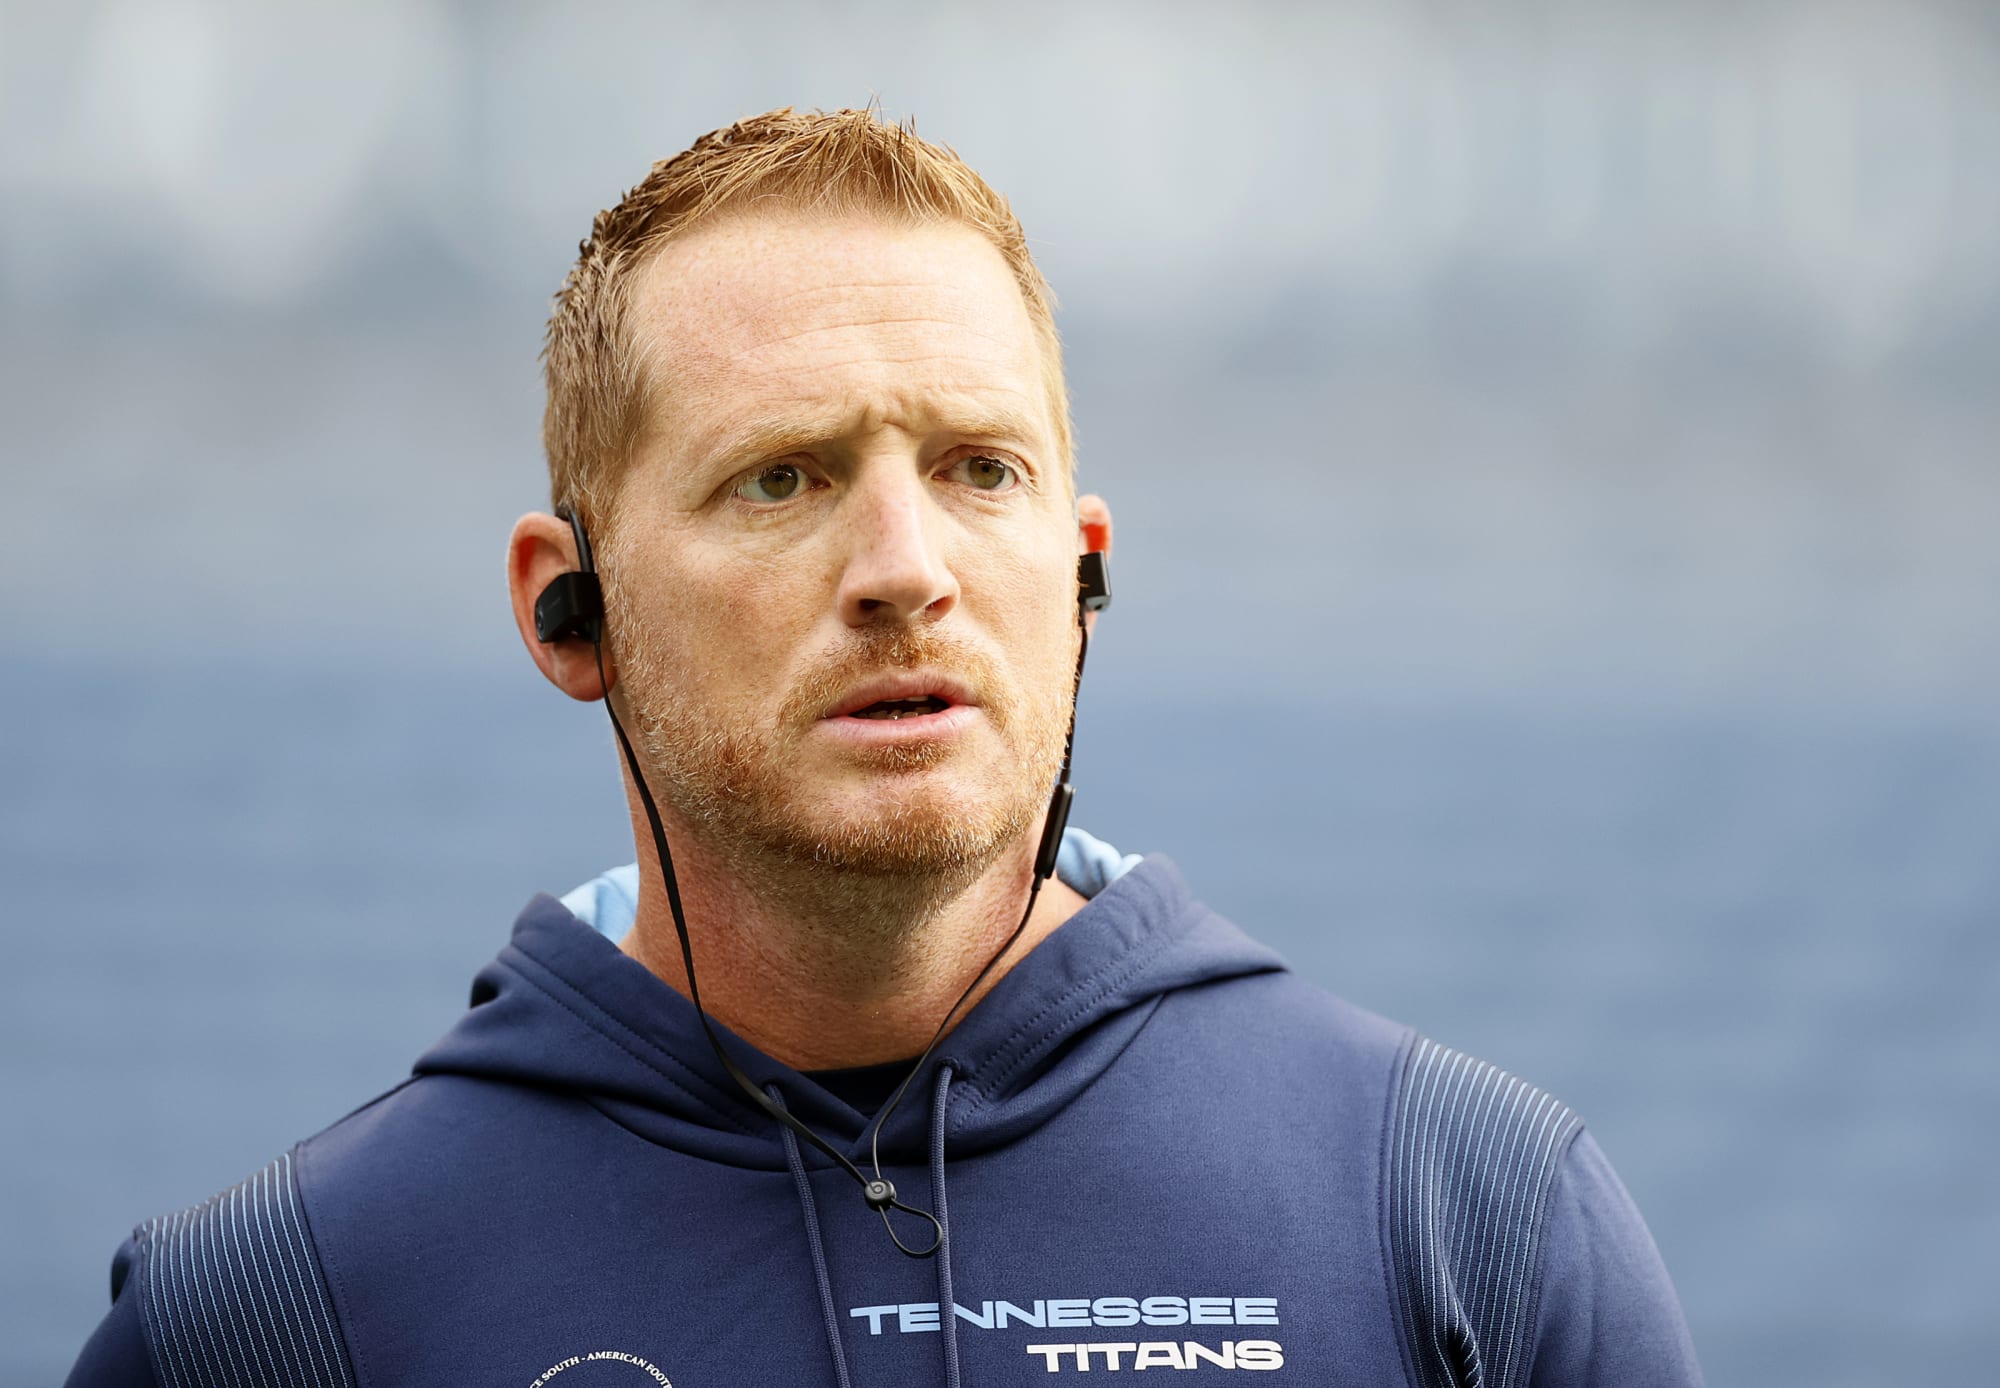 Titans offensive coordinator arrested for DUI after win over Packers